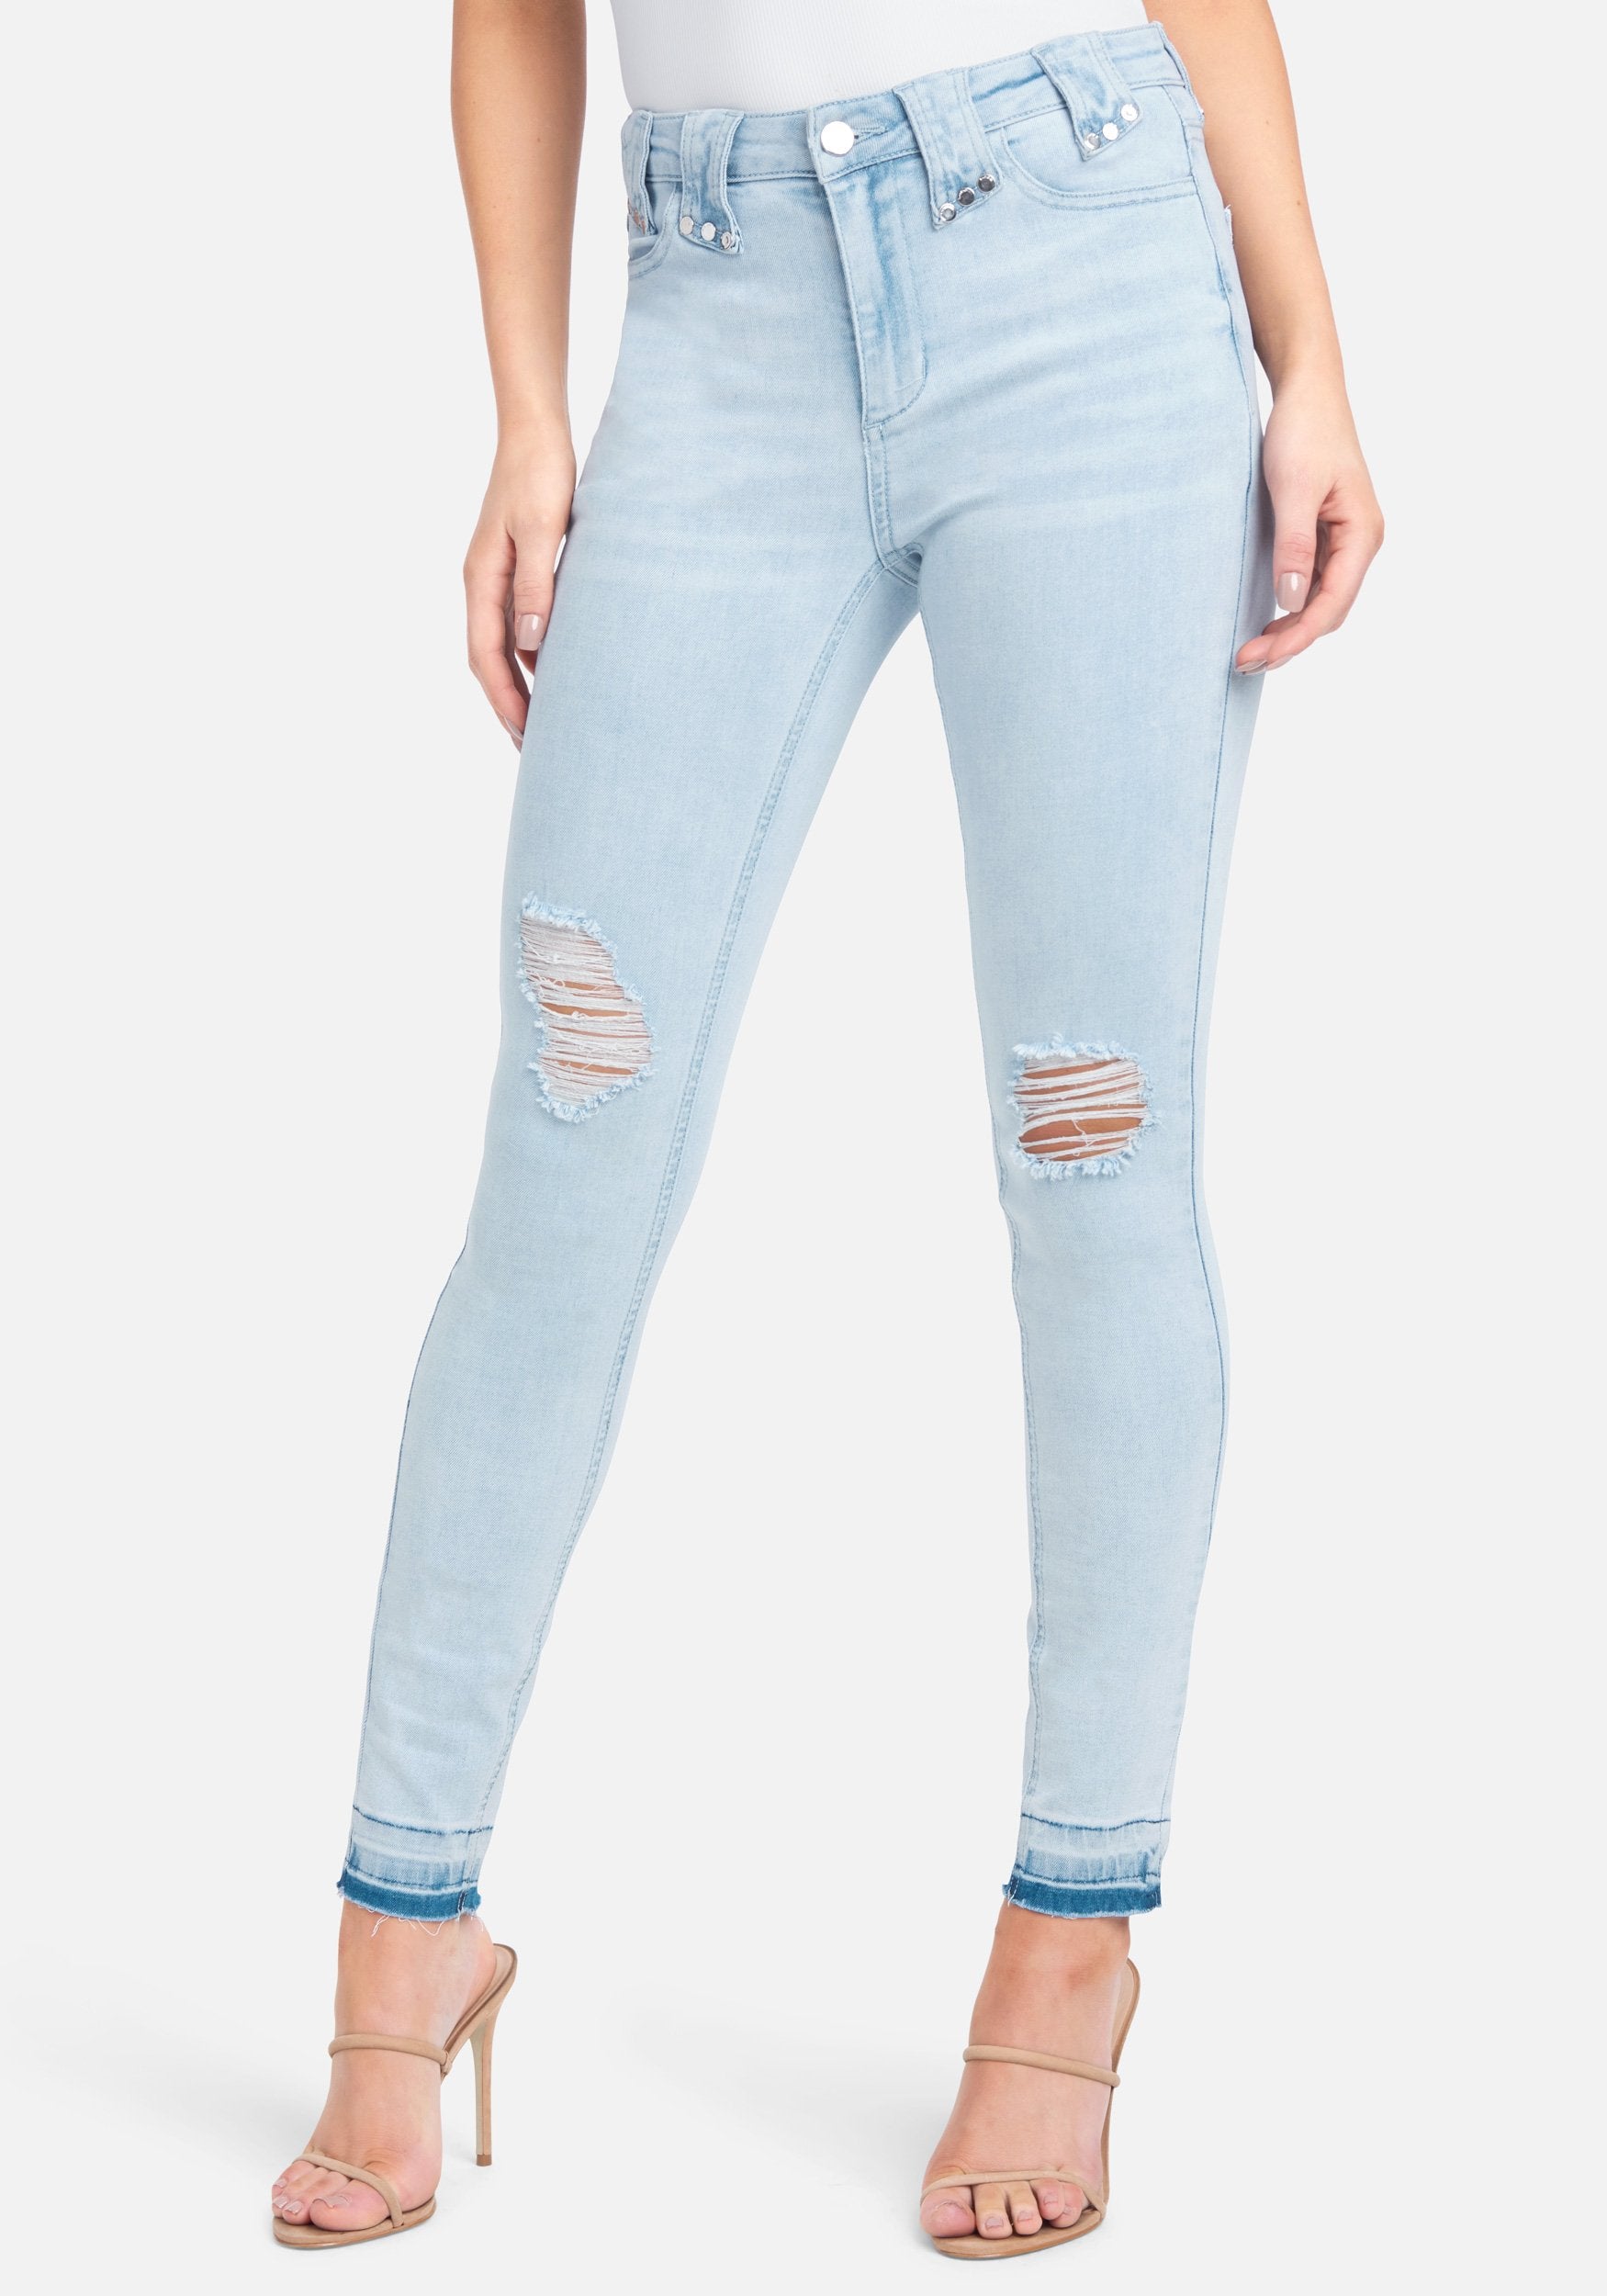 Bebe Women's Distressed Skinny Jeans, Size 25 in Light Blue Wash Cotton/Spandex